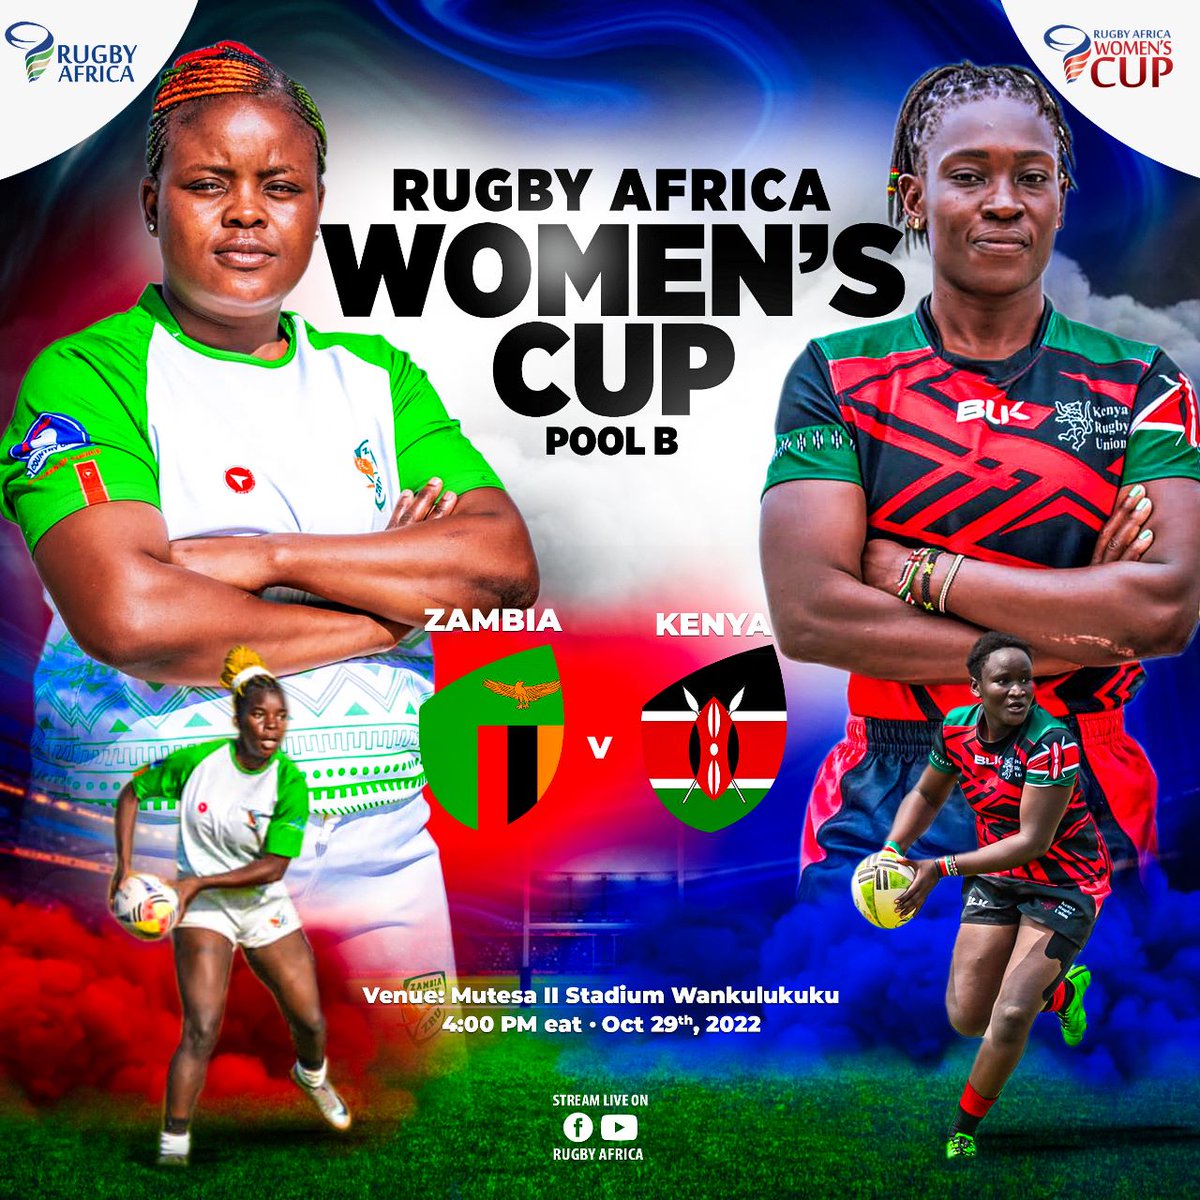 LIVE from our Youtube channel. Don't miss the Zambia v Kenya clash tomorrow! #WomensCup